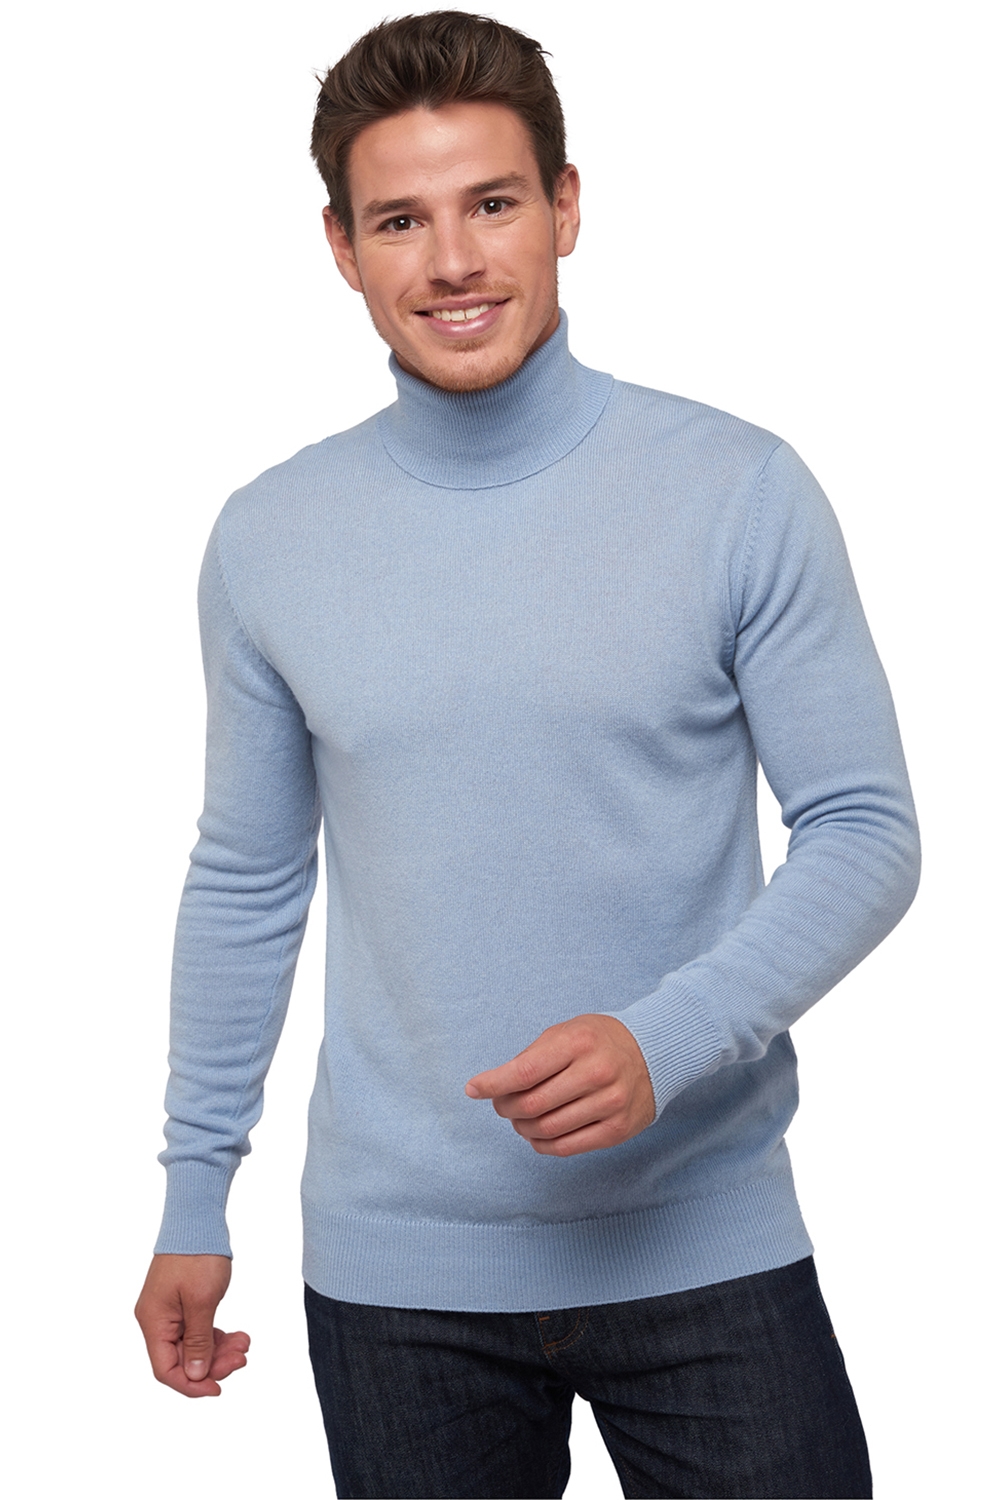 Cashmere men low prices tarry first sky blue m